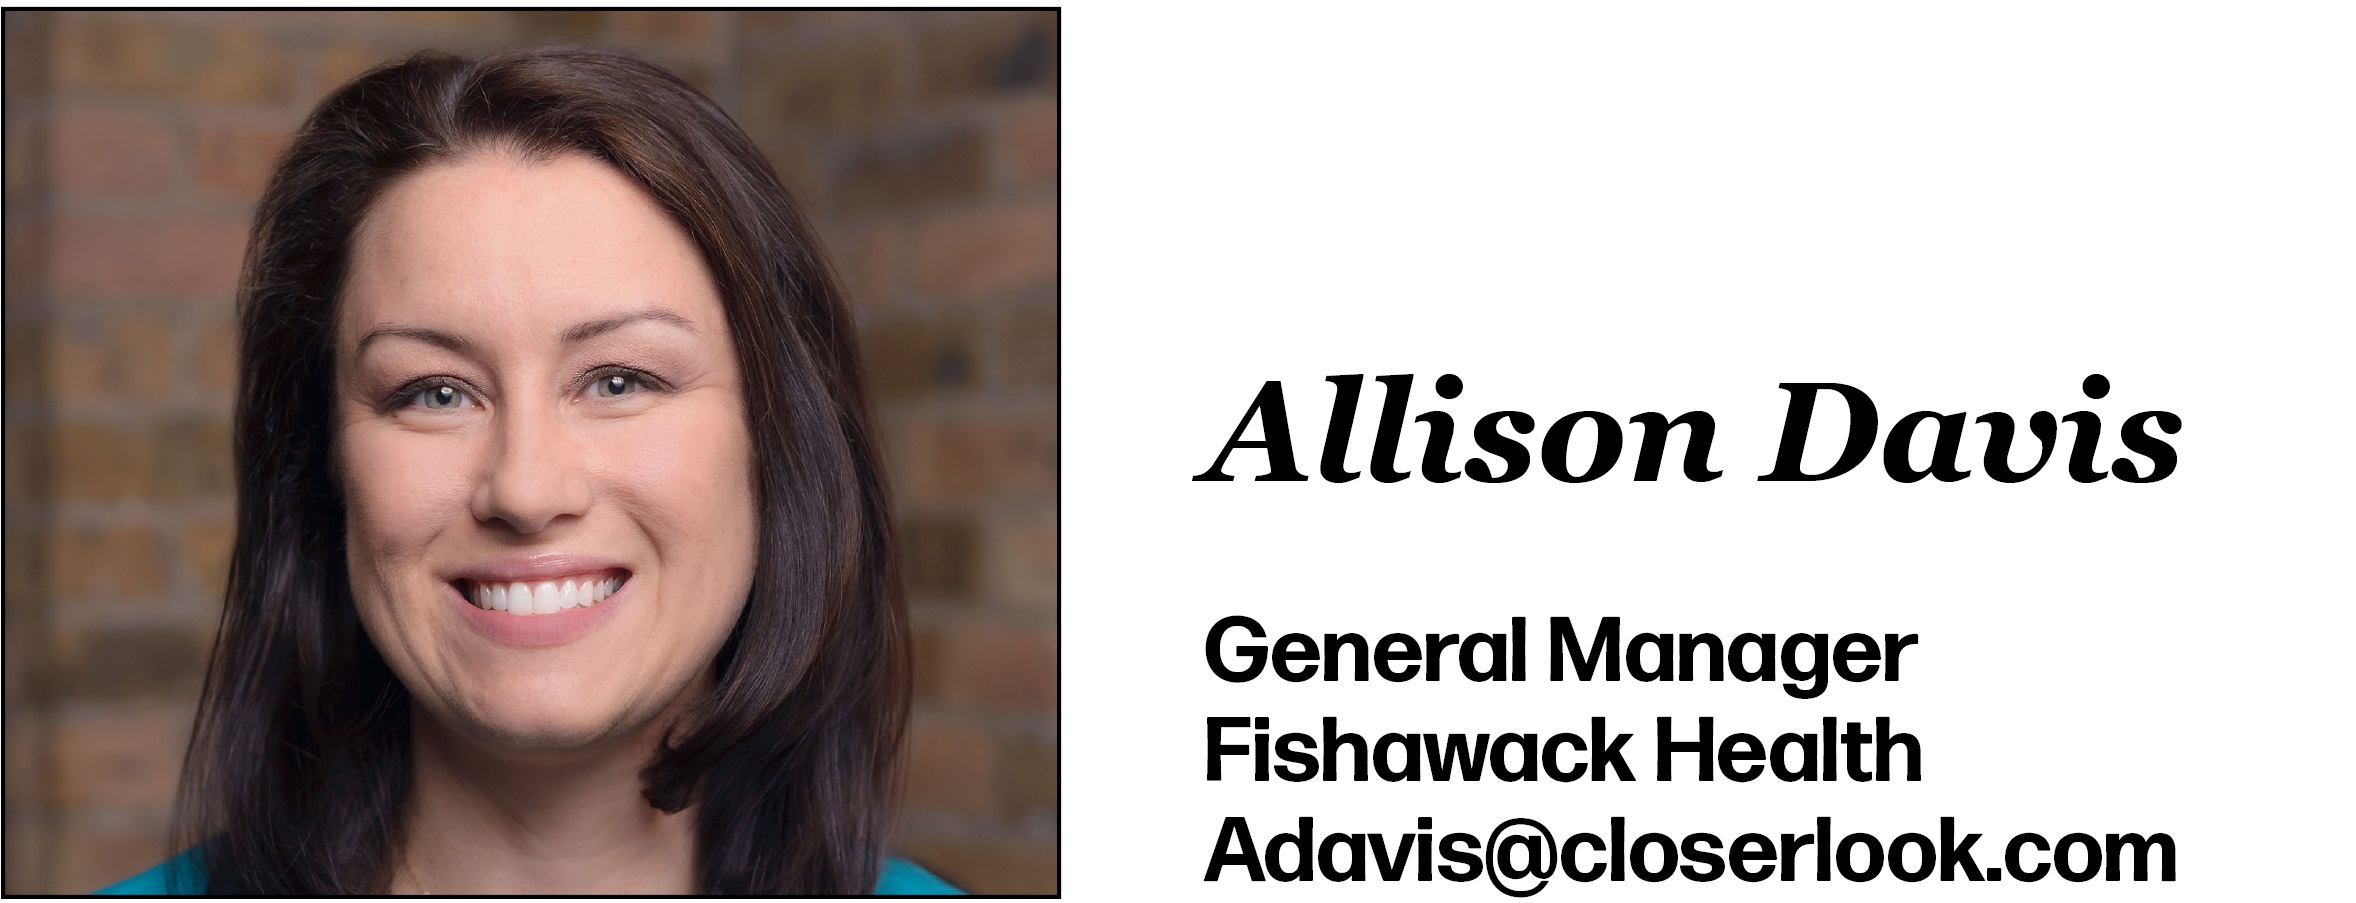 Allison Davis is General Manager at Fishawack Health. Her email is Adavis@closerlook.com.